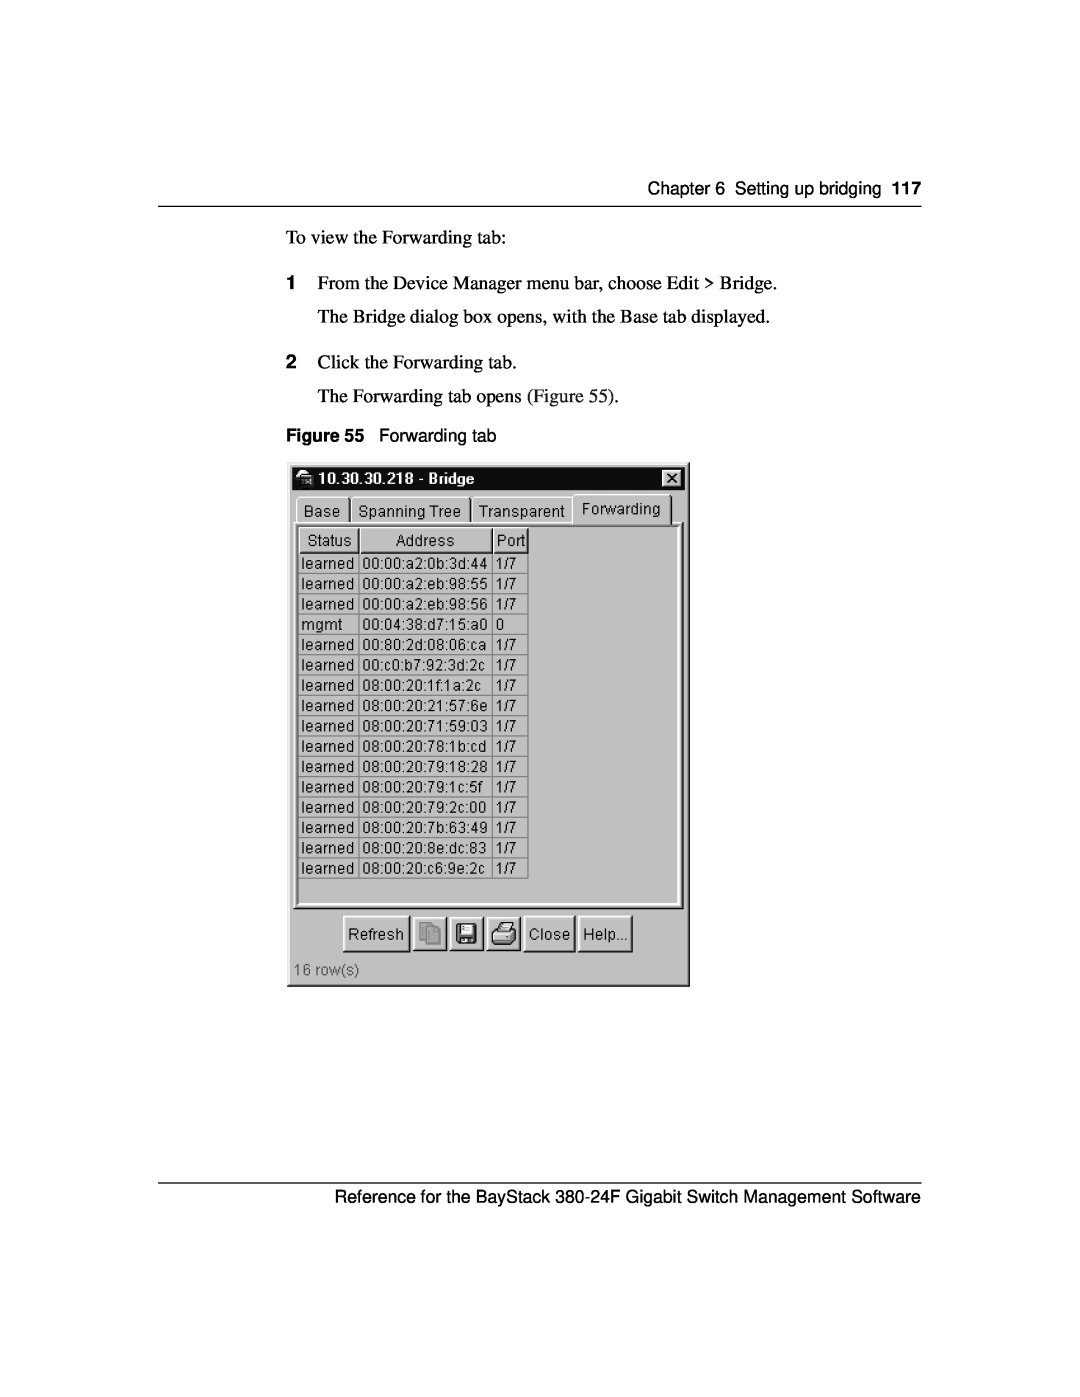 Nortel Networks 214393-A manual To view the Forwarding tab, 2Click the Forwarding tab, The Forwarding tab opens Figure 